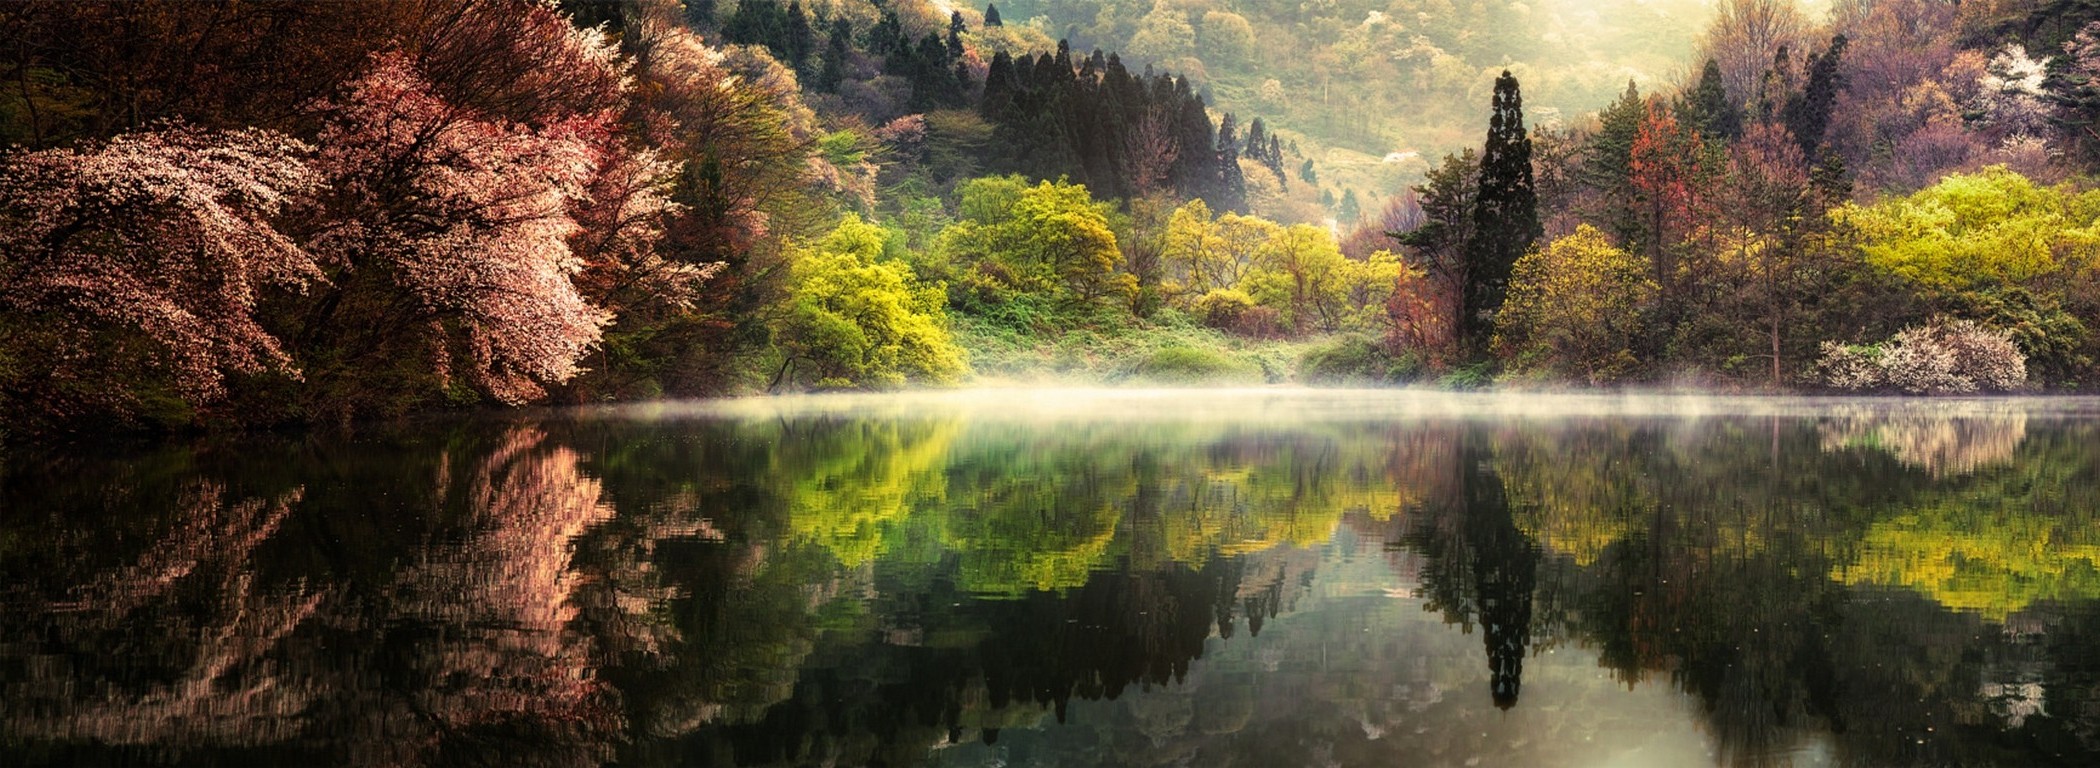 nature, Landscape, Spring, Lake, Morning, Forest, Mist, Trees, Water, Reflection, Mountain, South Korea Wallpaper